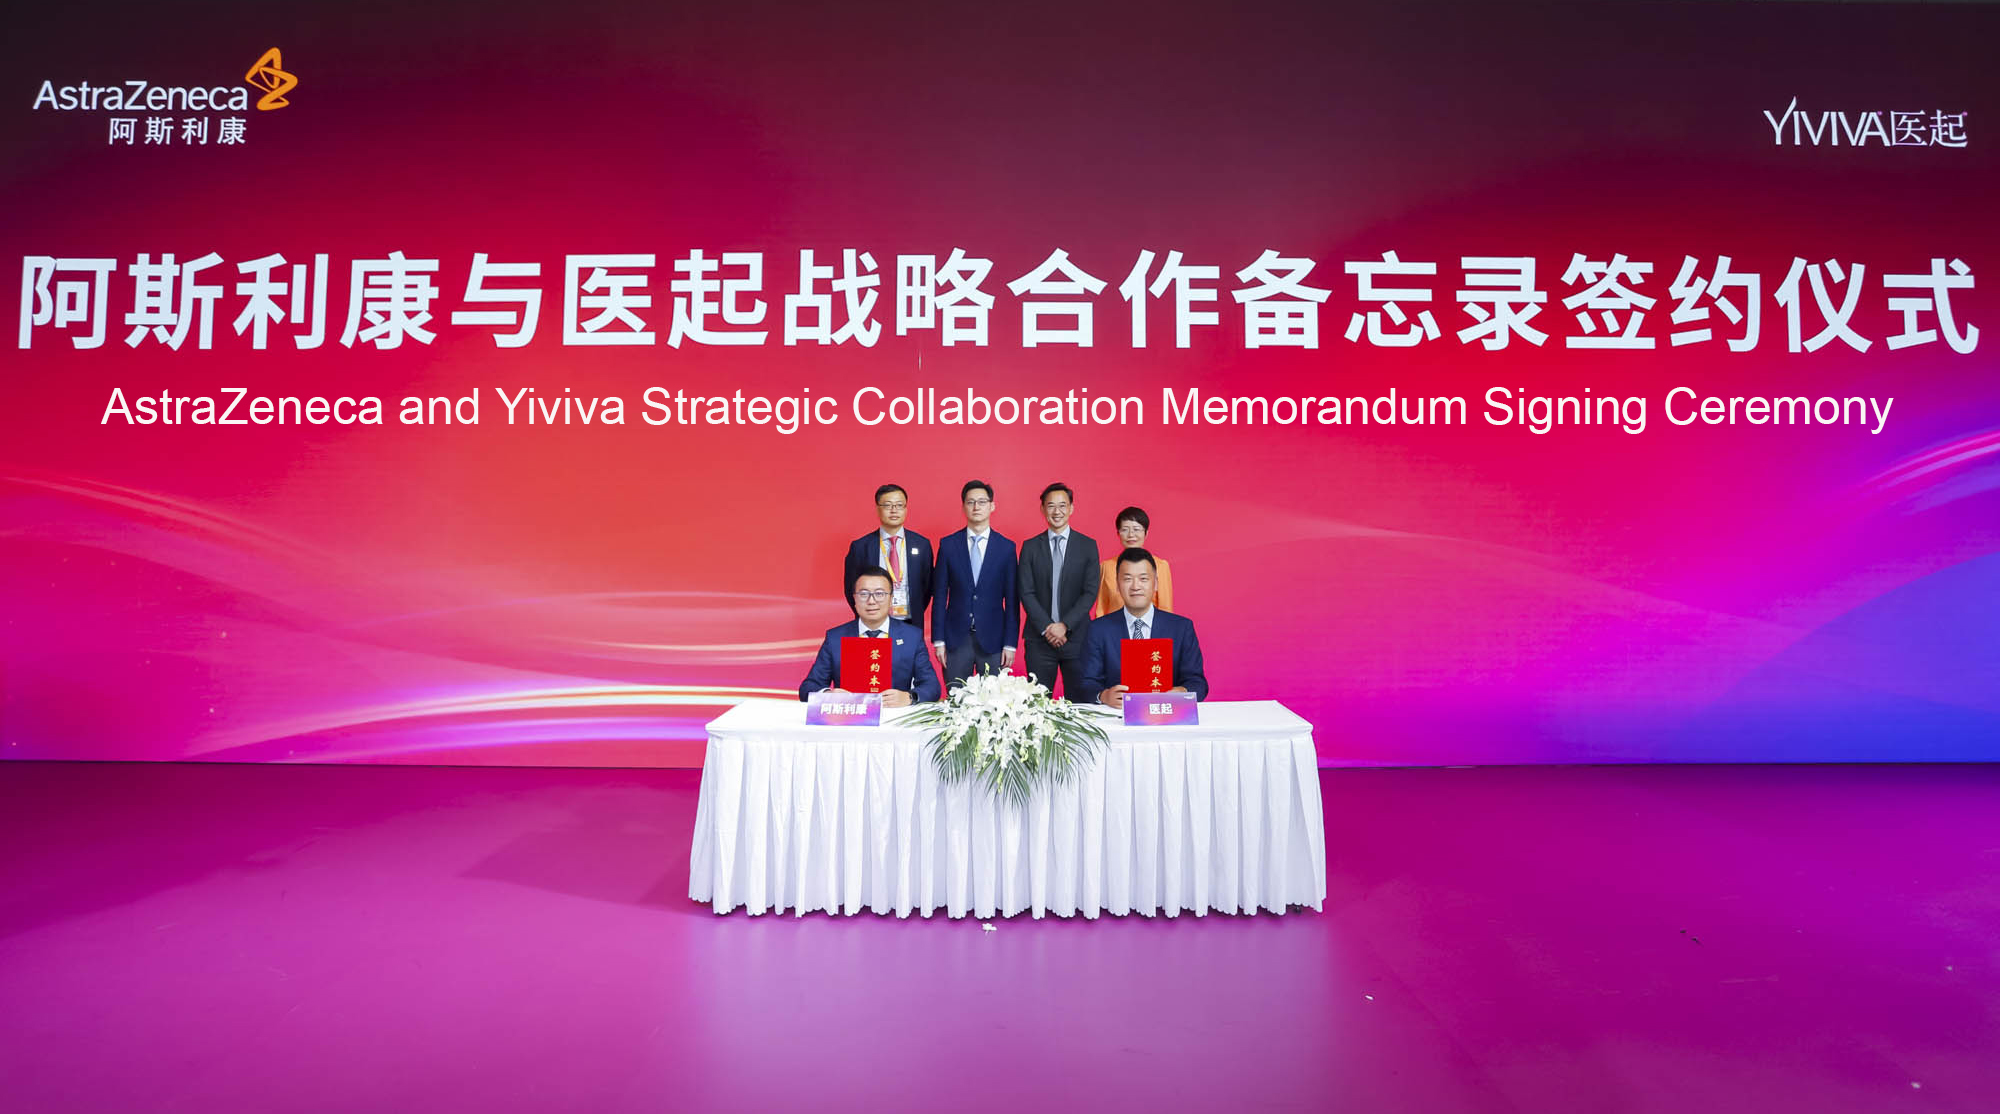 Yiviva and AstraZeneca China sign memorandum of understanding to strategically collaborate on developing systems biology platforms and innovative botanical medicines